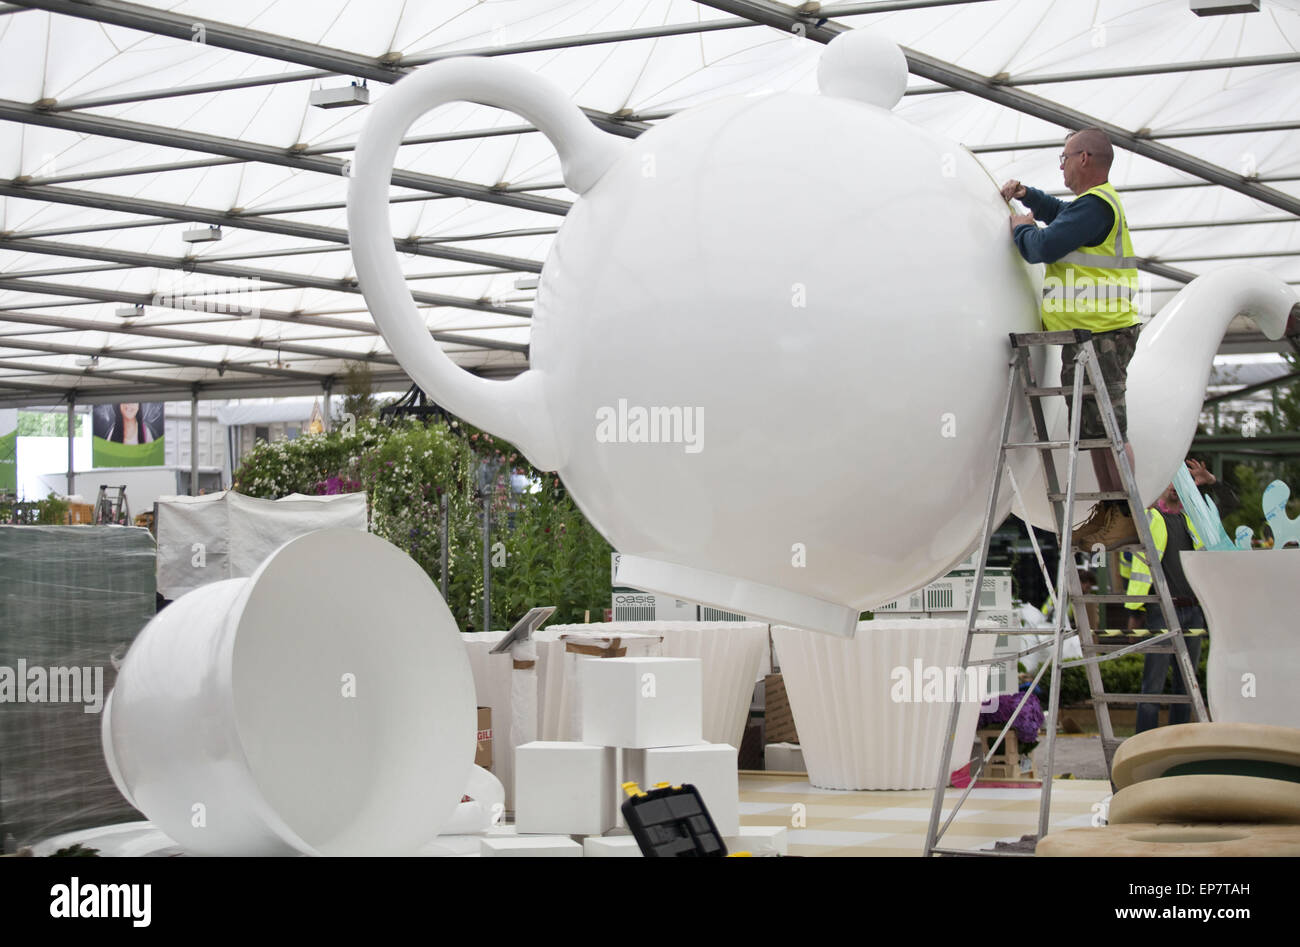 London, UK. 14th May, 2015. Preparations of the Interflora display include fine-tuning the arger then life tea pot and a tea cup. Four days before opening, Chelsea Flower Show is bustling with preparations accompanied by a rain. The Chelsea Flower Show organised by Royal Horticultural Society (RHS) in the grounds of the Royal Hospital Chelsea every May, is the most famous flower show in the United Kingdom, perhaps in the world. It attracts exhibitors and visitors from around the world, London, UK. Credit:  Veronika Lukasova/ZUMA Wire/Alamy Live News Stock Photo